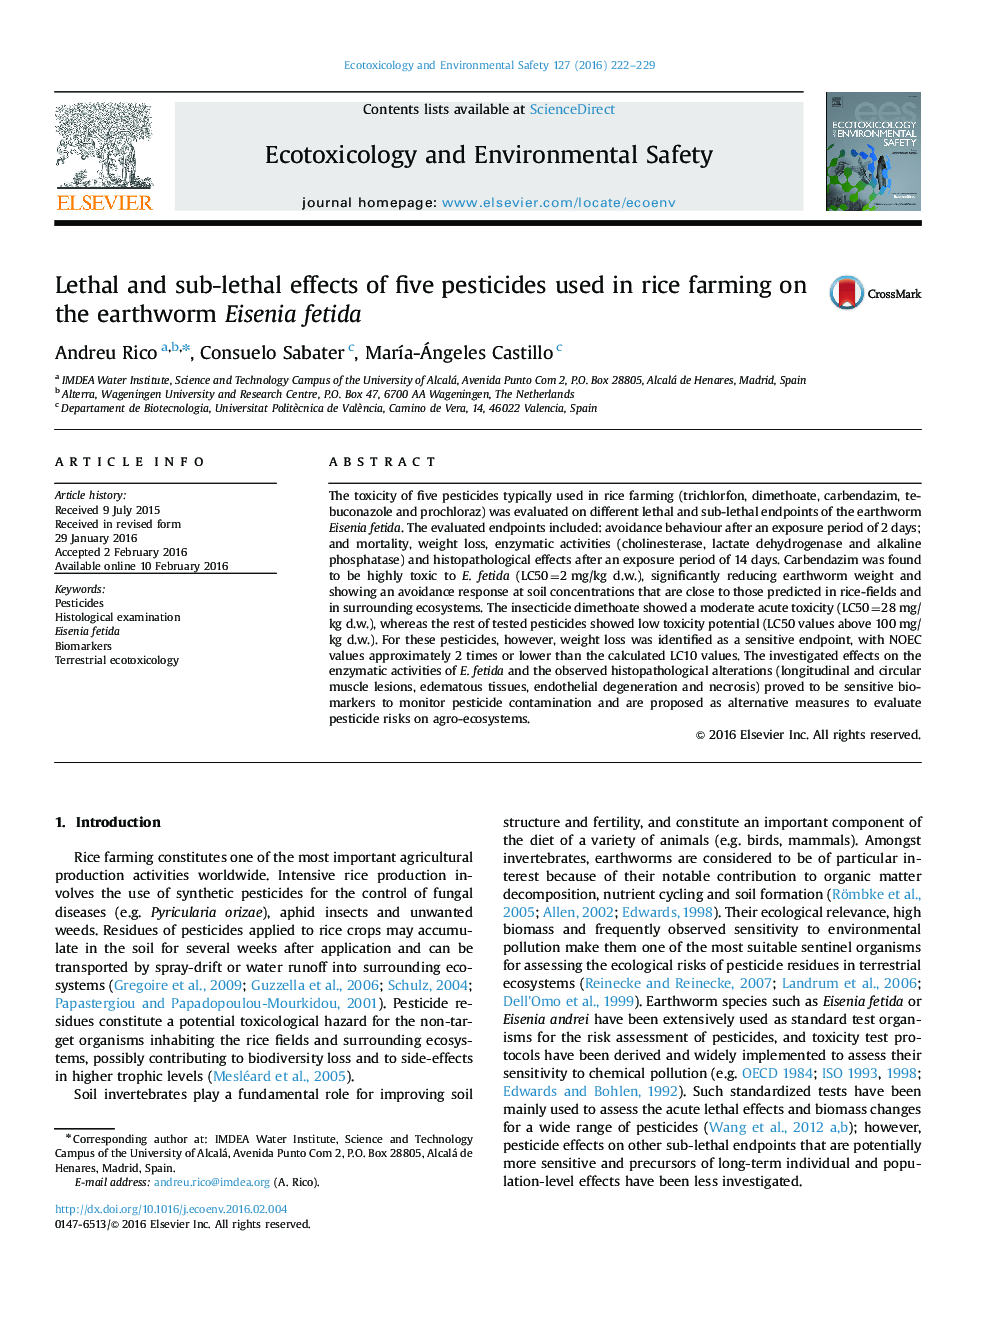 Lethal and sub-lethal effects of five pesticides used in rice farming on the earthworm Eisenia fetida